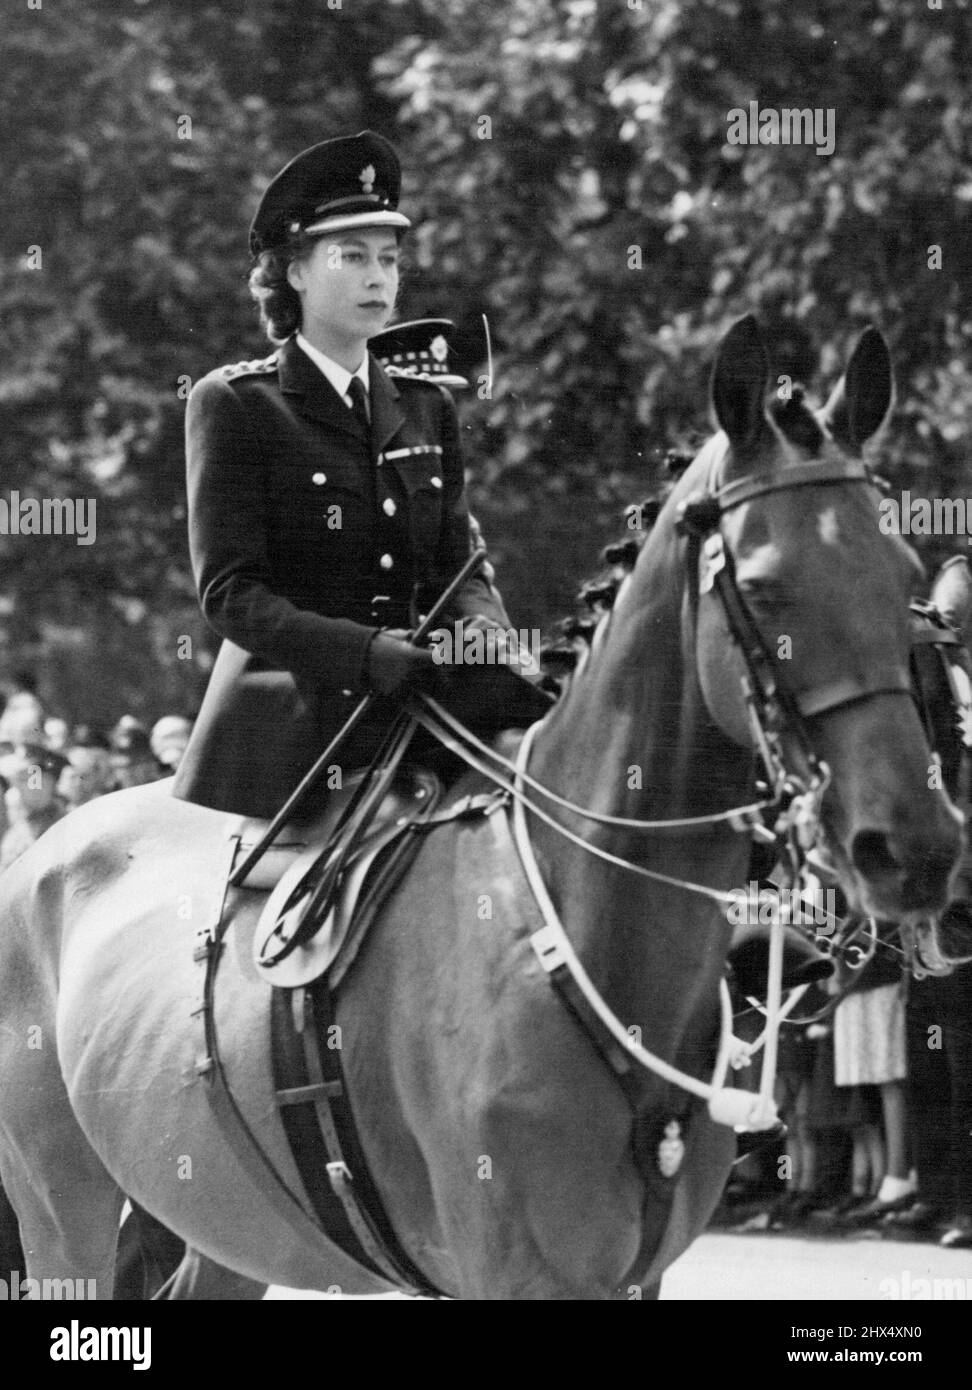 Trooping The Colour Ceremony - H.R.H. Princess Elizabeth made a striking figure a she rode side-saddle in her new uniform. The annual ceremony of Trooping the Colour was held today, the official birthday of the King. The ceremony took place at the Horse Guards parade, Whitehall, London. The King was accompanied by Princess Elizabeth who rode side-saddle on her mount. June 12, 1947. (Photo by Fox Photos). Stock Photo